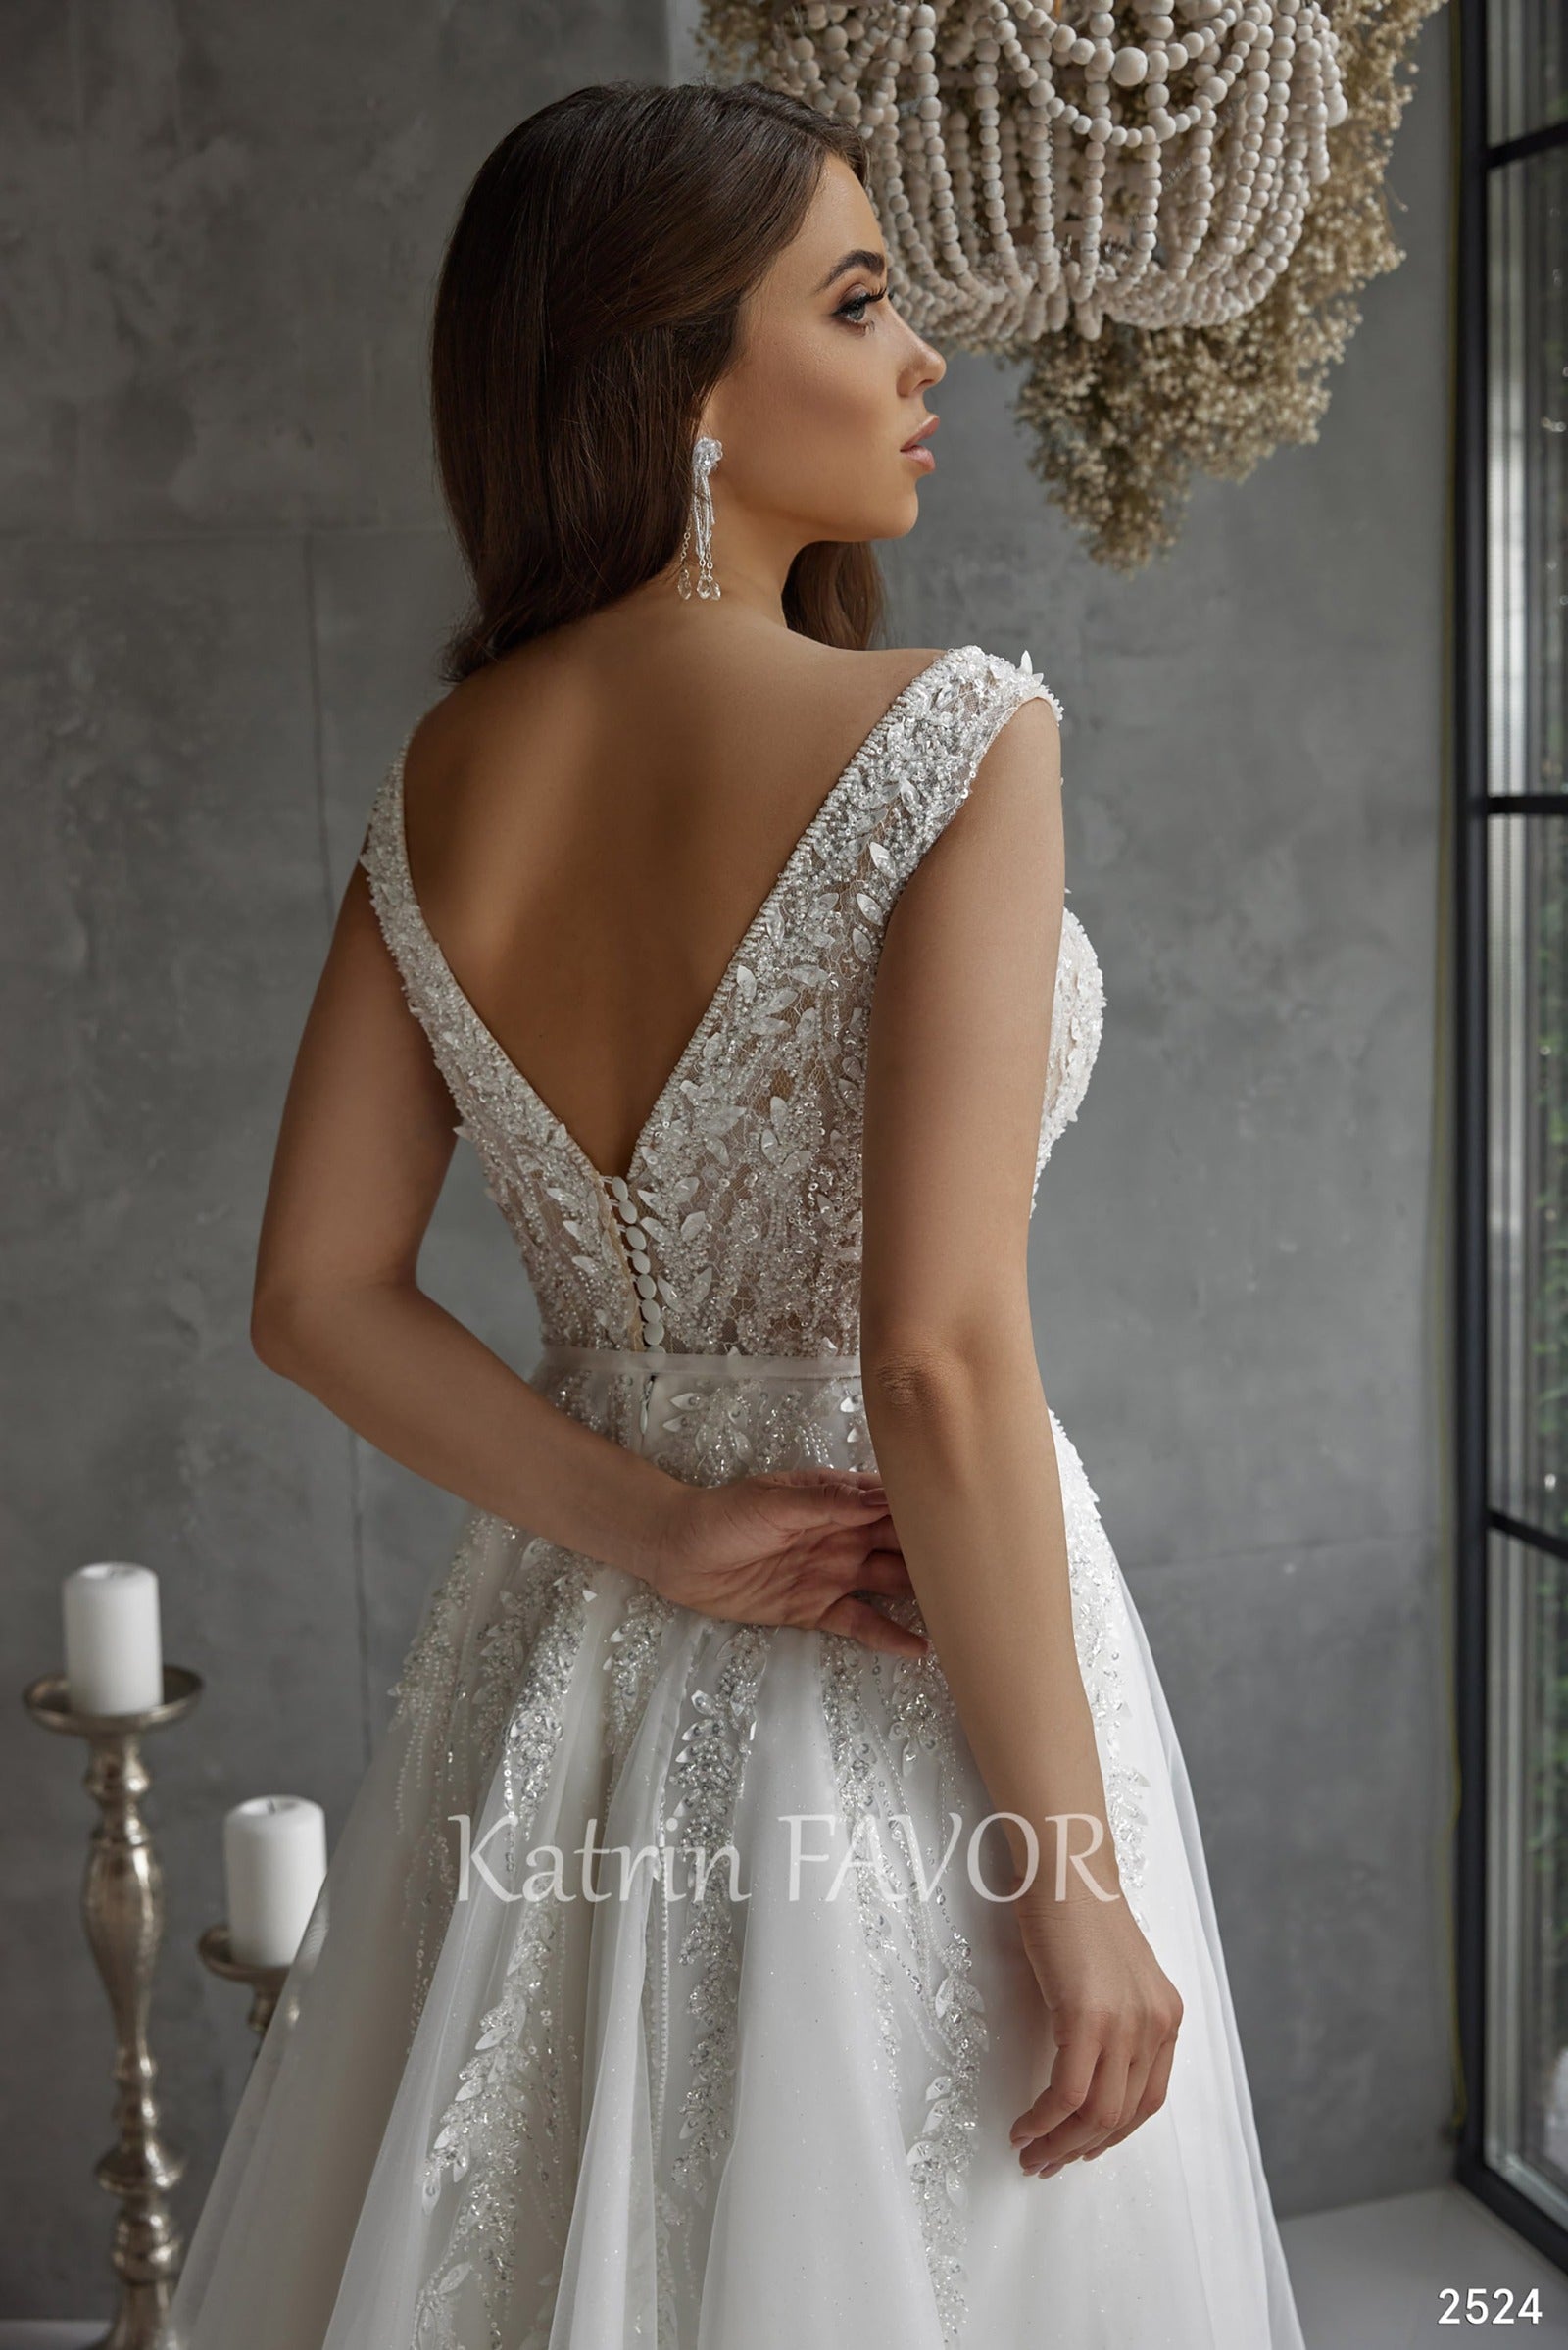 KatrinFAVORboutique-Romantic rustic embroidered wedding dress